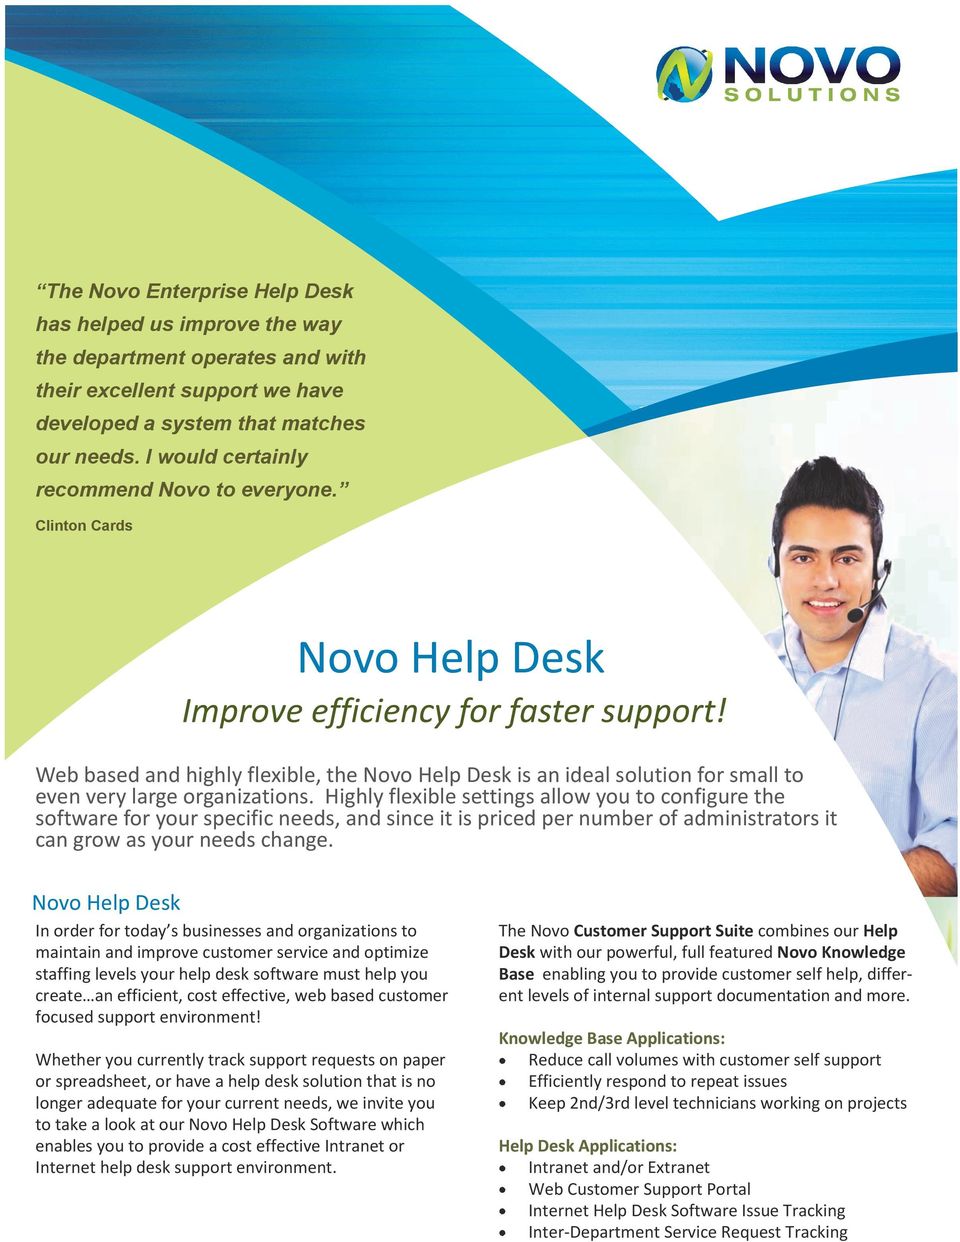 Web based and highly flexible, the Novo Help Desk is an ideal solution for small to even very large organizations.